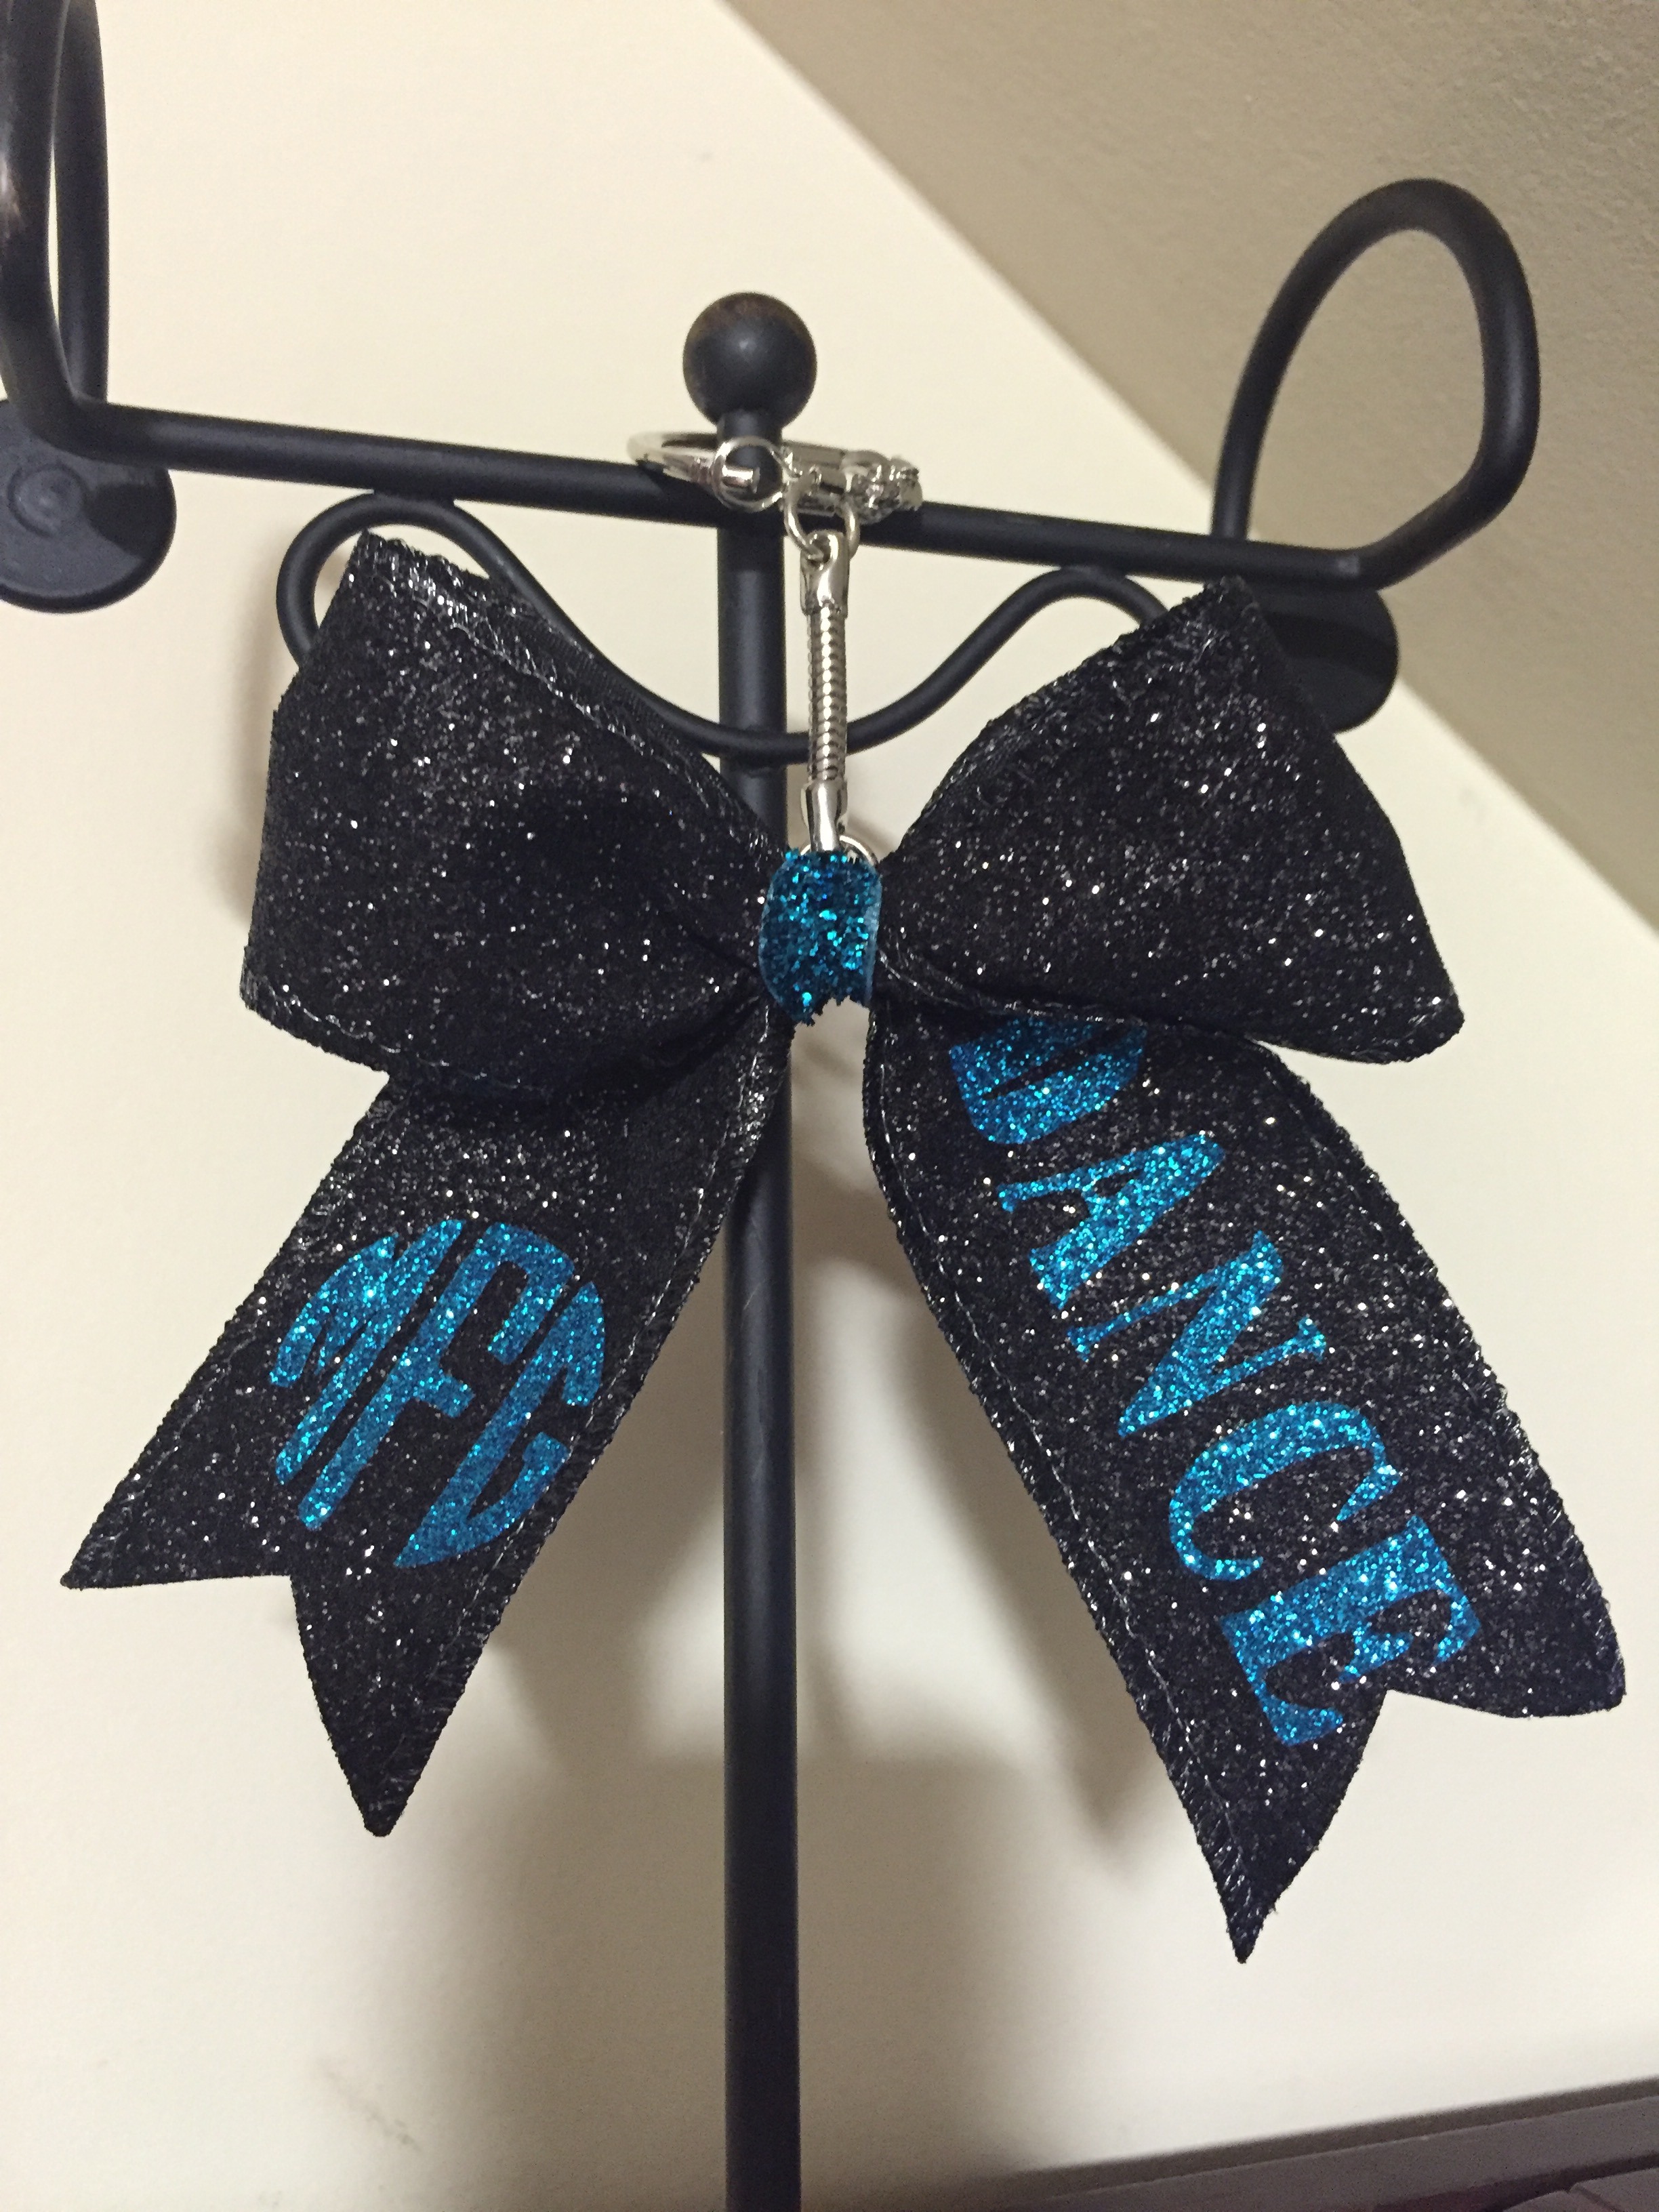 Stranger Things Cheer Bow Keychain for Sale in San Antonio, TX - OfferUp